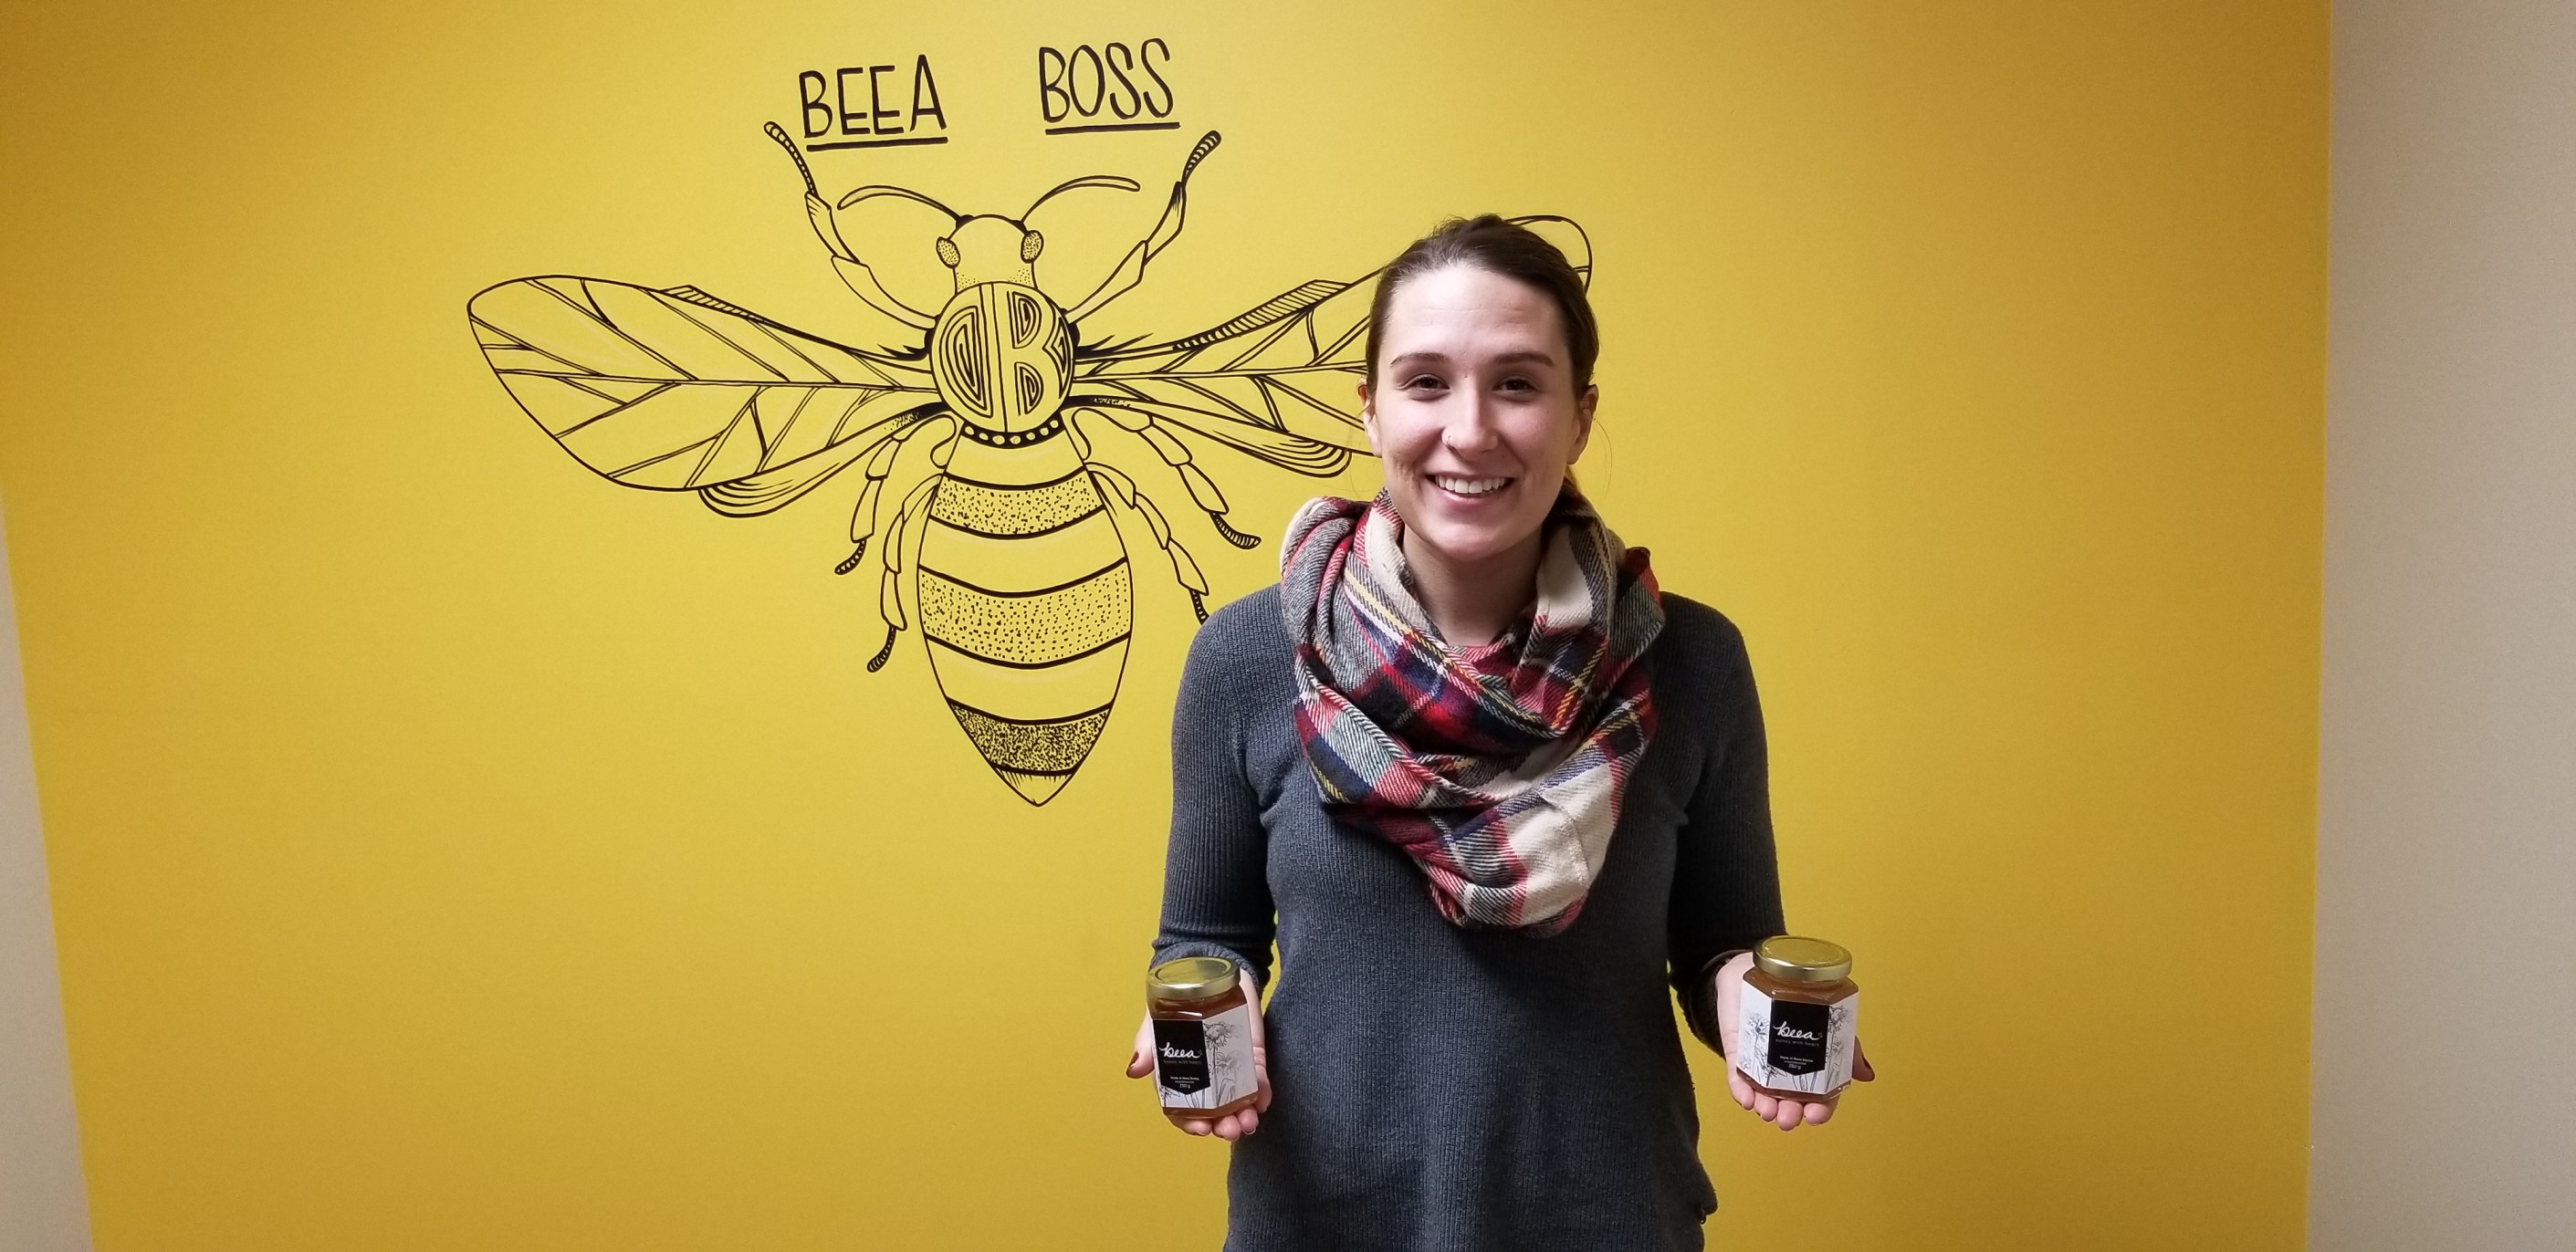 Kimberly Drisdelle, facilitator of BEEA Honey with a Heart, stands with some of the group's honey.